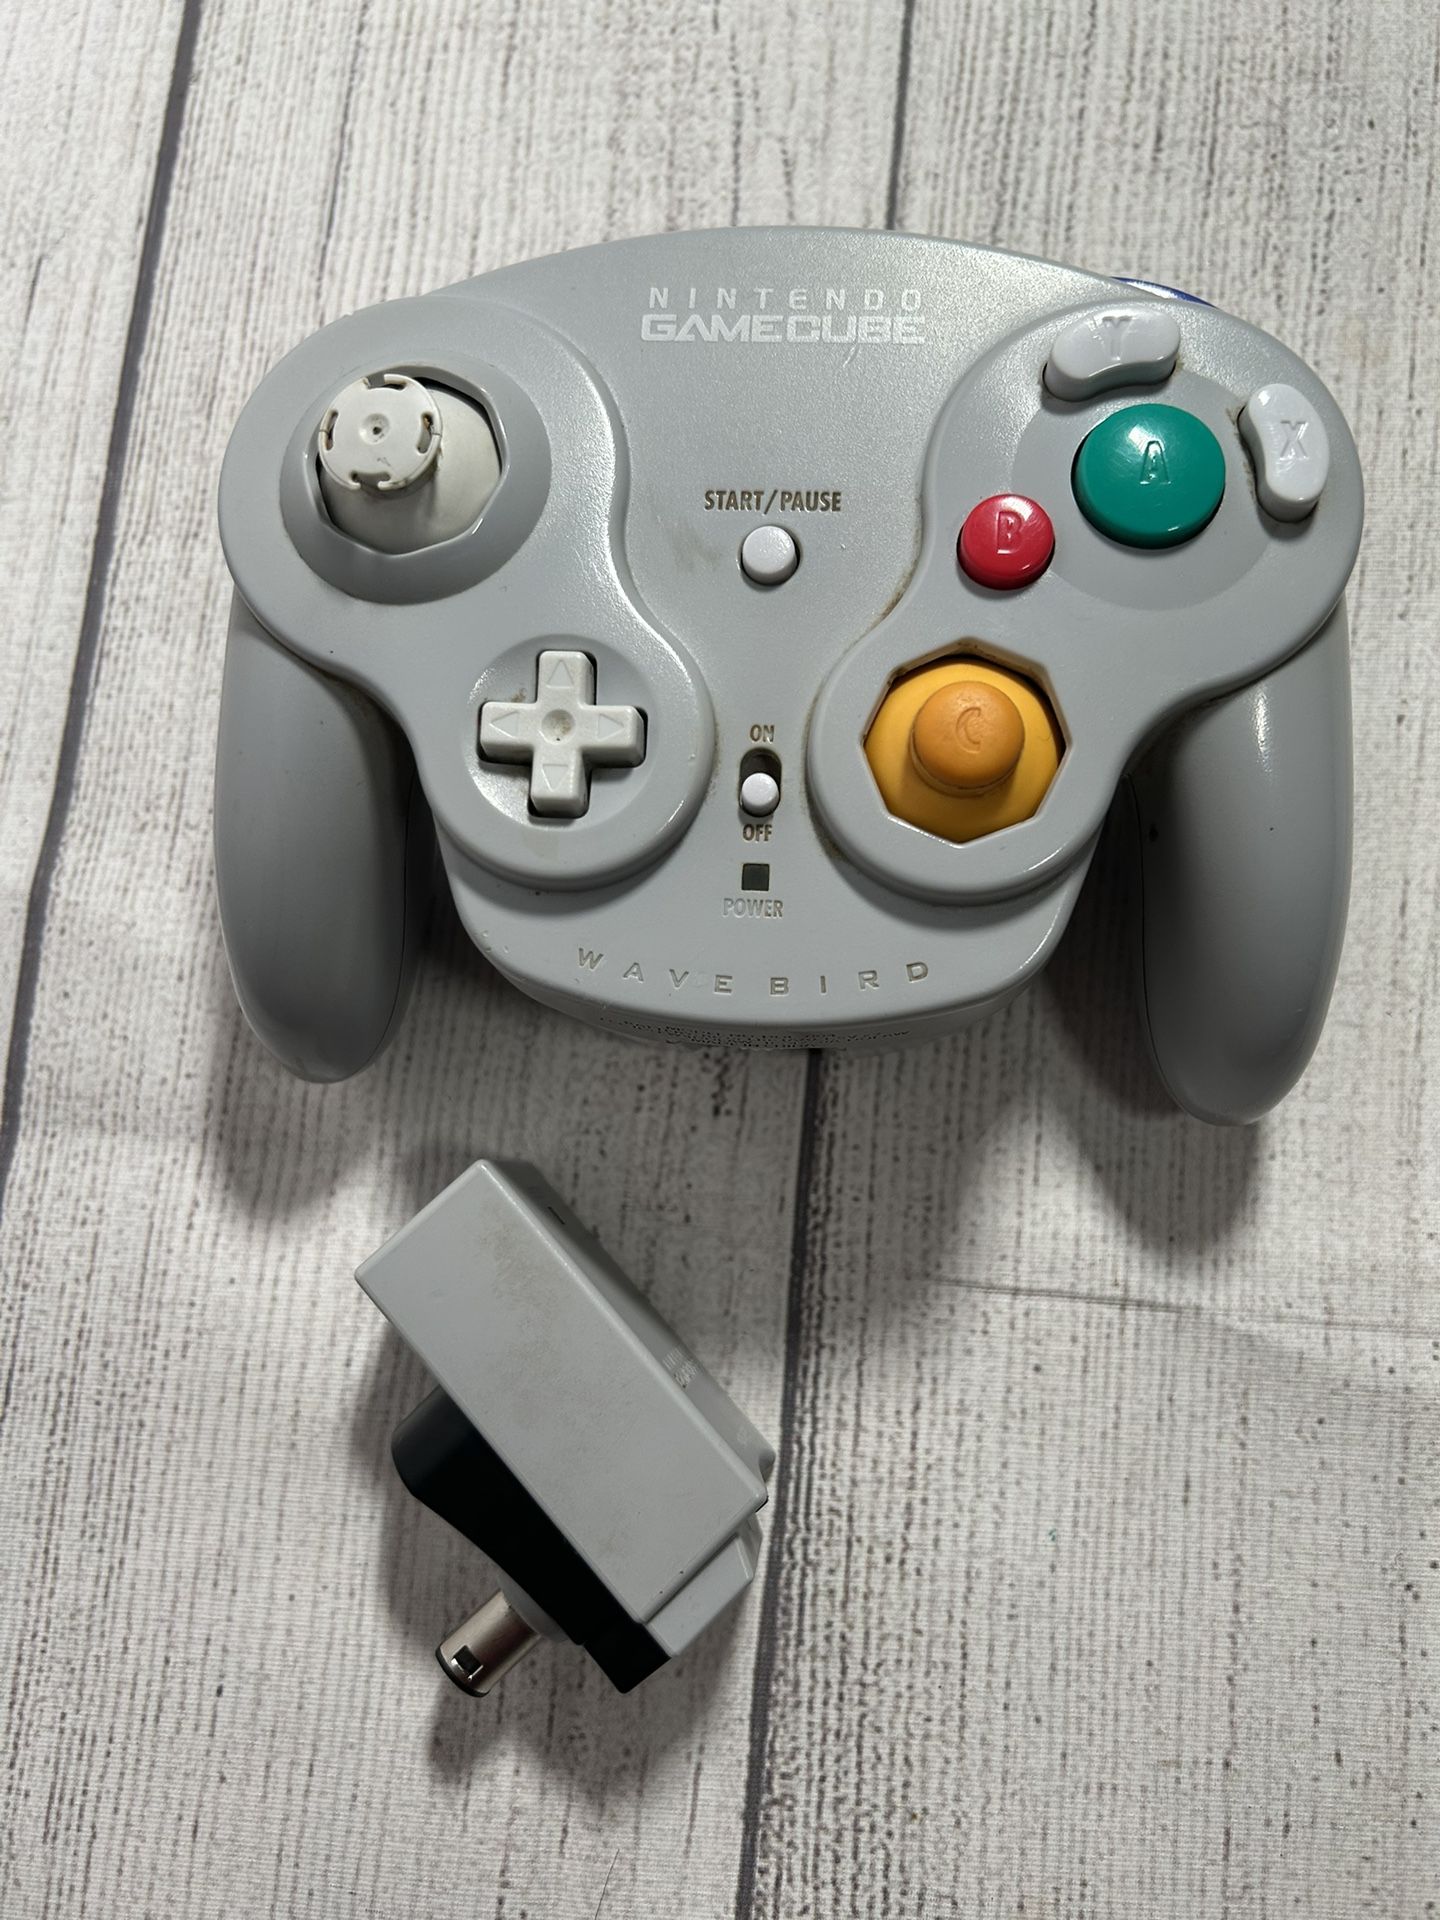 Nintendo Gamecube Wavebird with dongle receiver - Tested